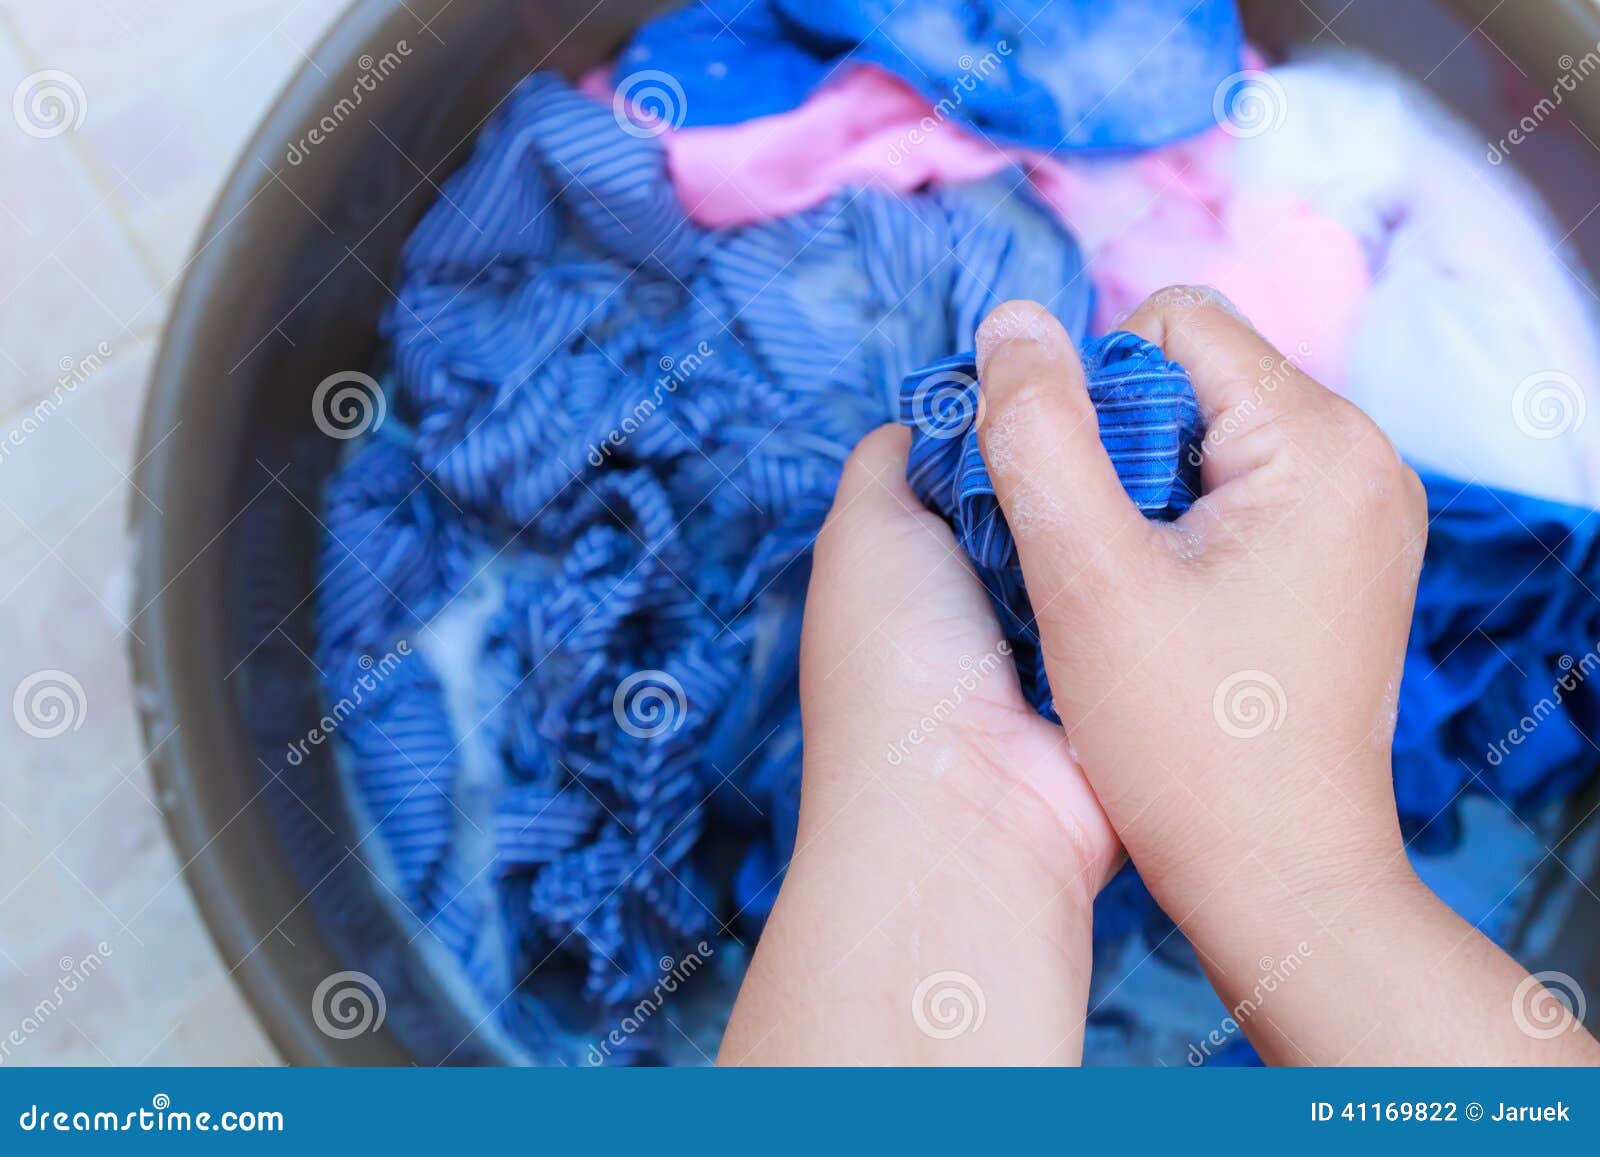 https://thumbs.dreamstime.com/z/washing-clothes-hand-daytime-41169822.jpg